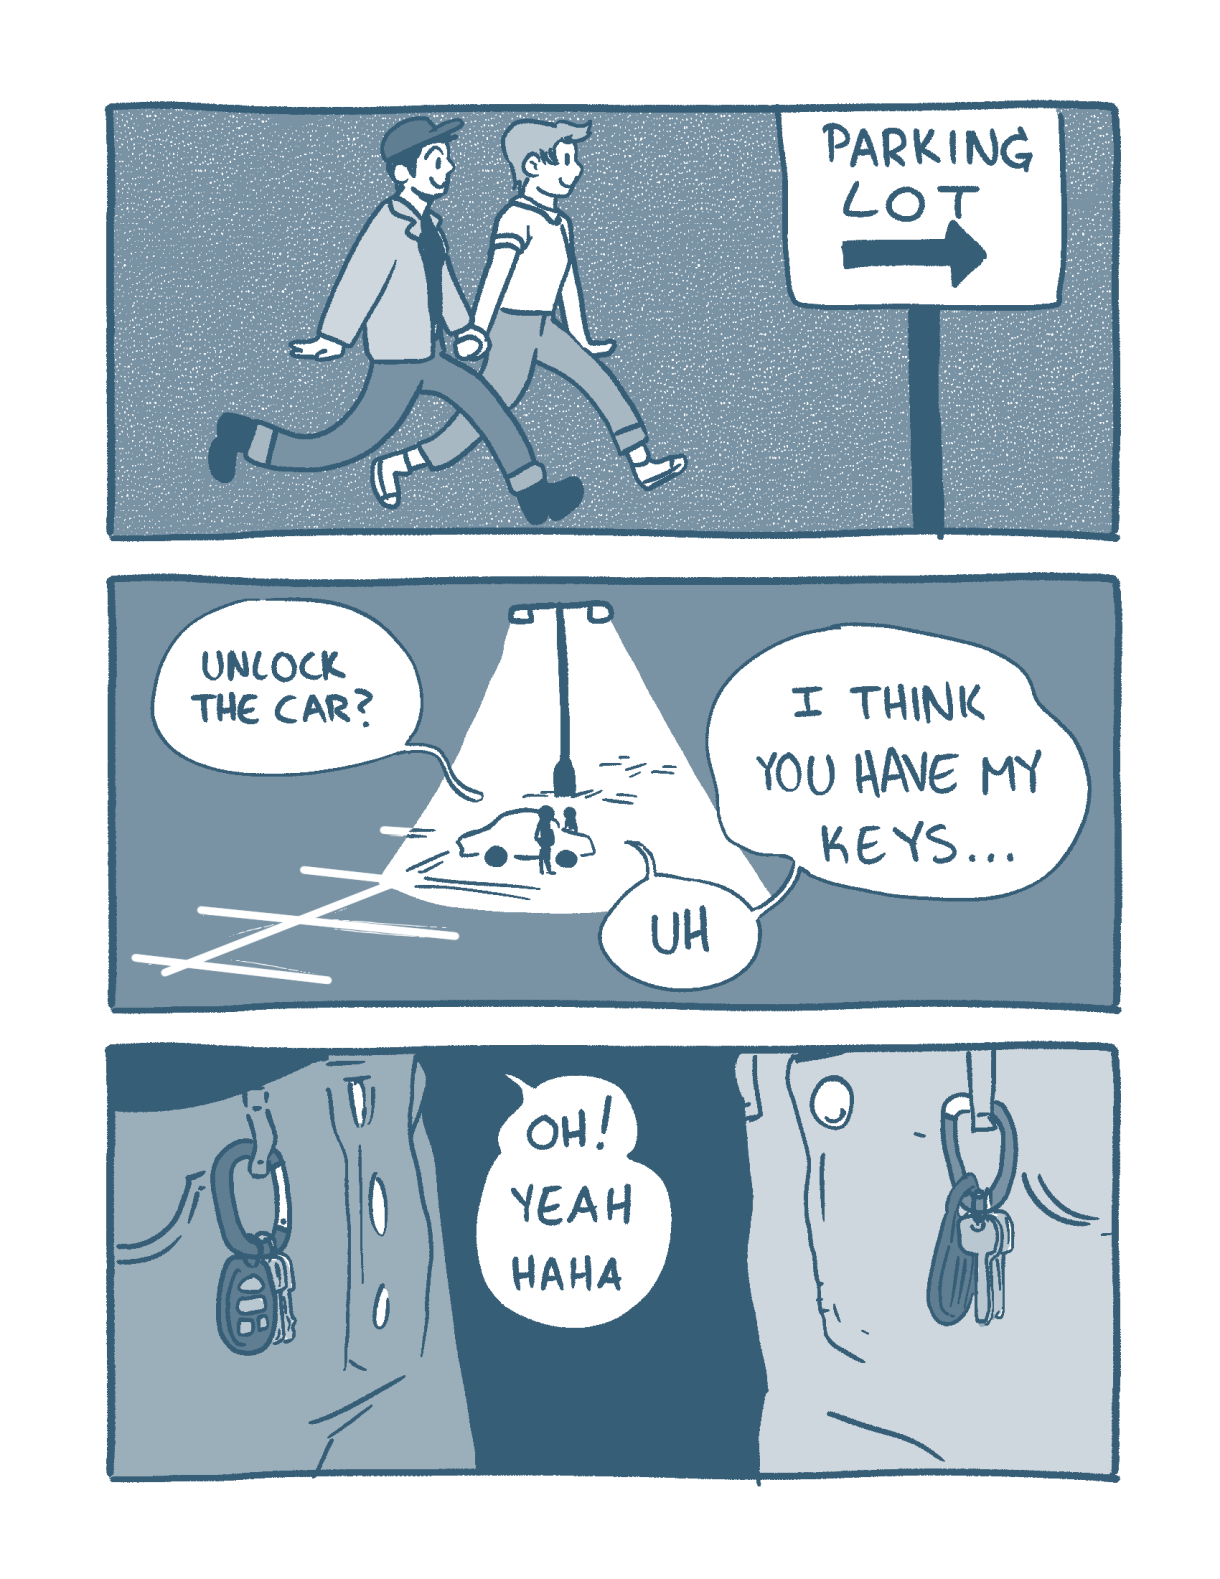 In a three panel comic, two queers walk towards the parking lot. One says, "unlock the car?" and the next one says "Uh.. I think you have a my keys" and then the first one laughs it off, "Oh yeah!"